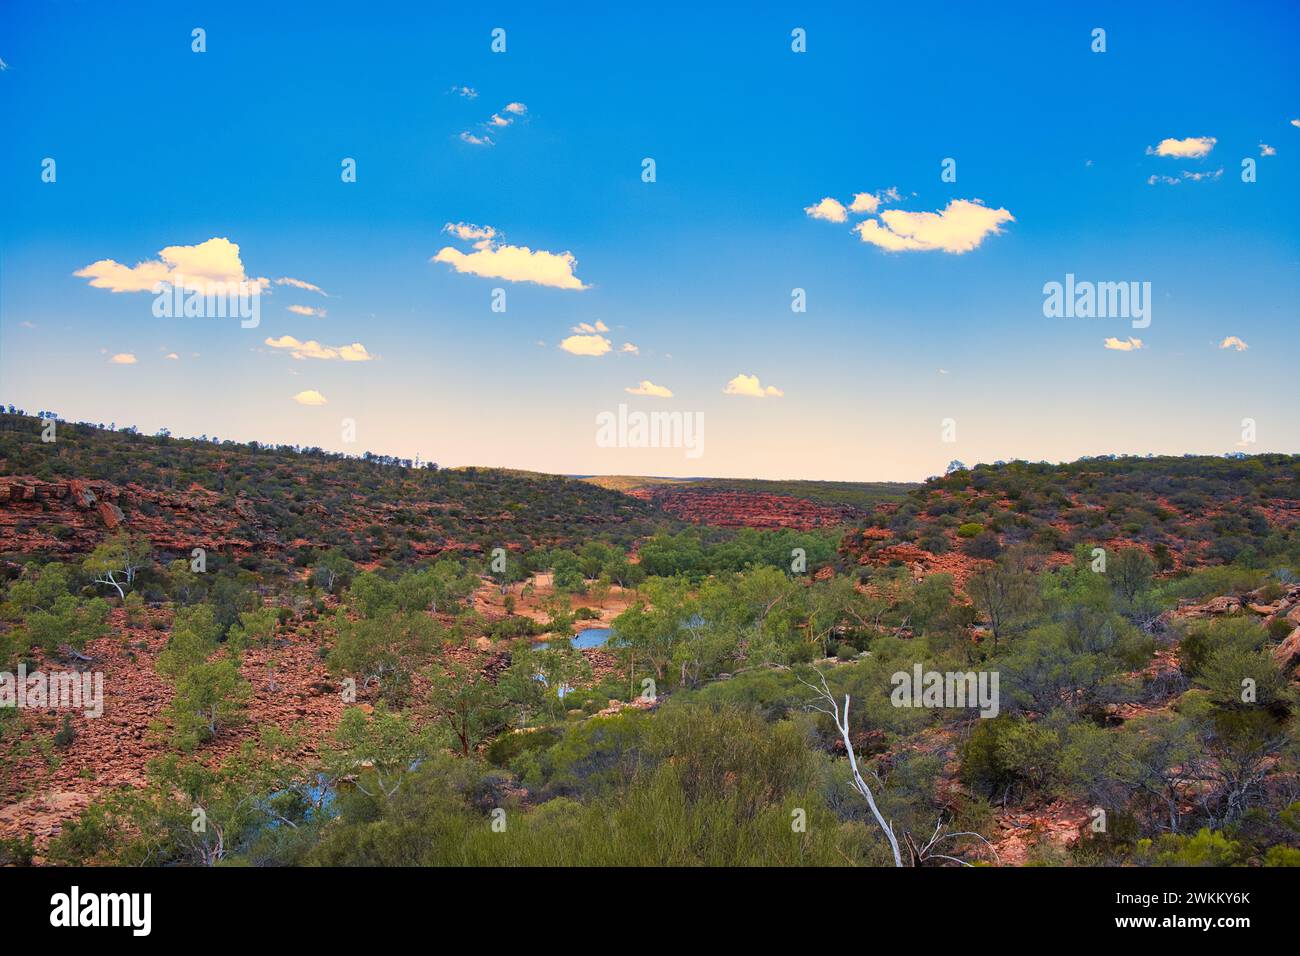 View of the valley of the Murchison River, with green trees and red rocks, from the Ross Graham River Walk, Kalbarri National Park, Western Australia Stock Photo